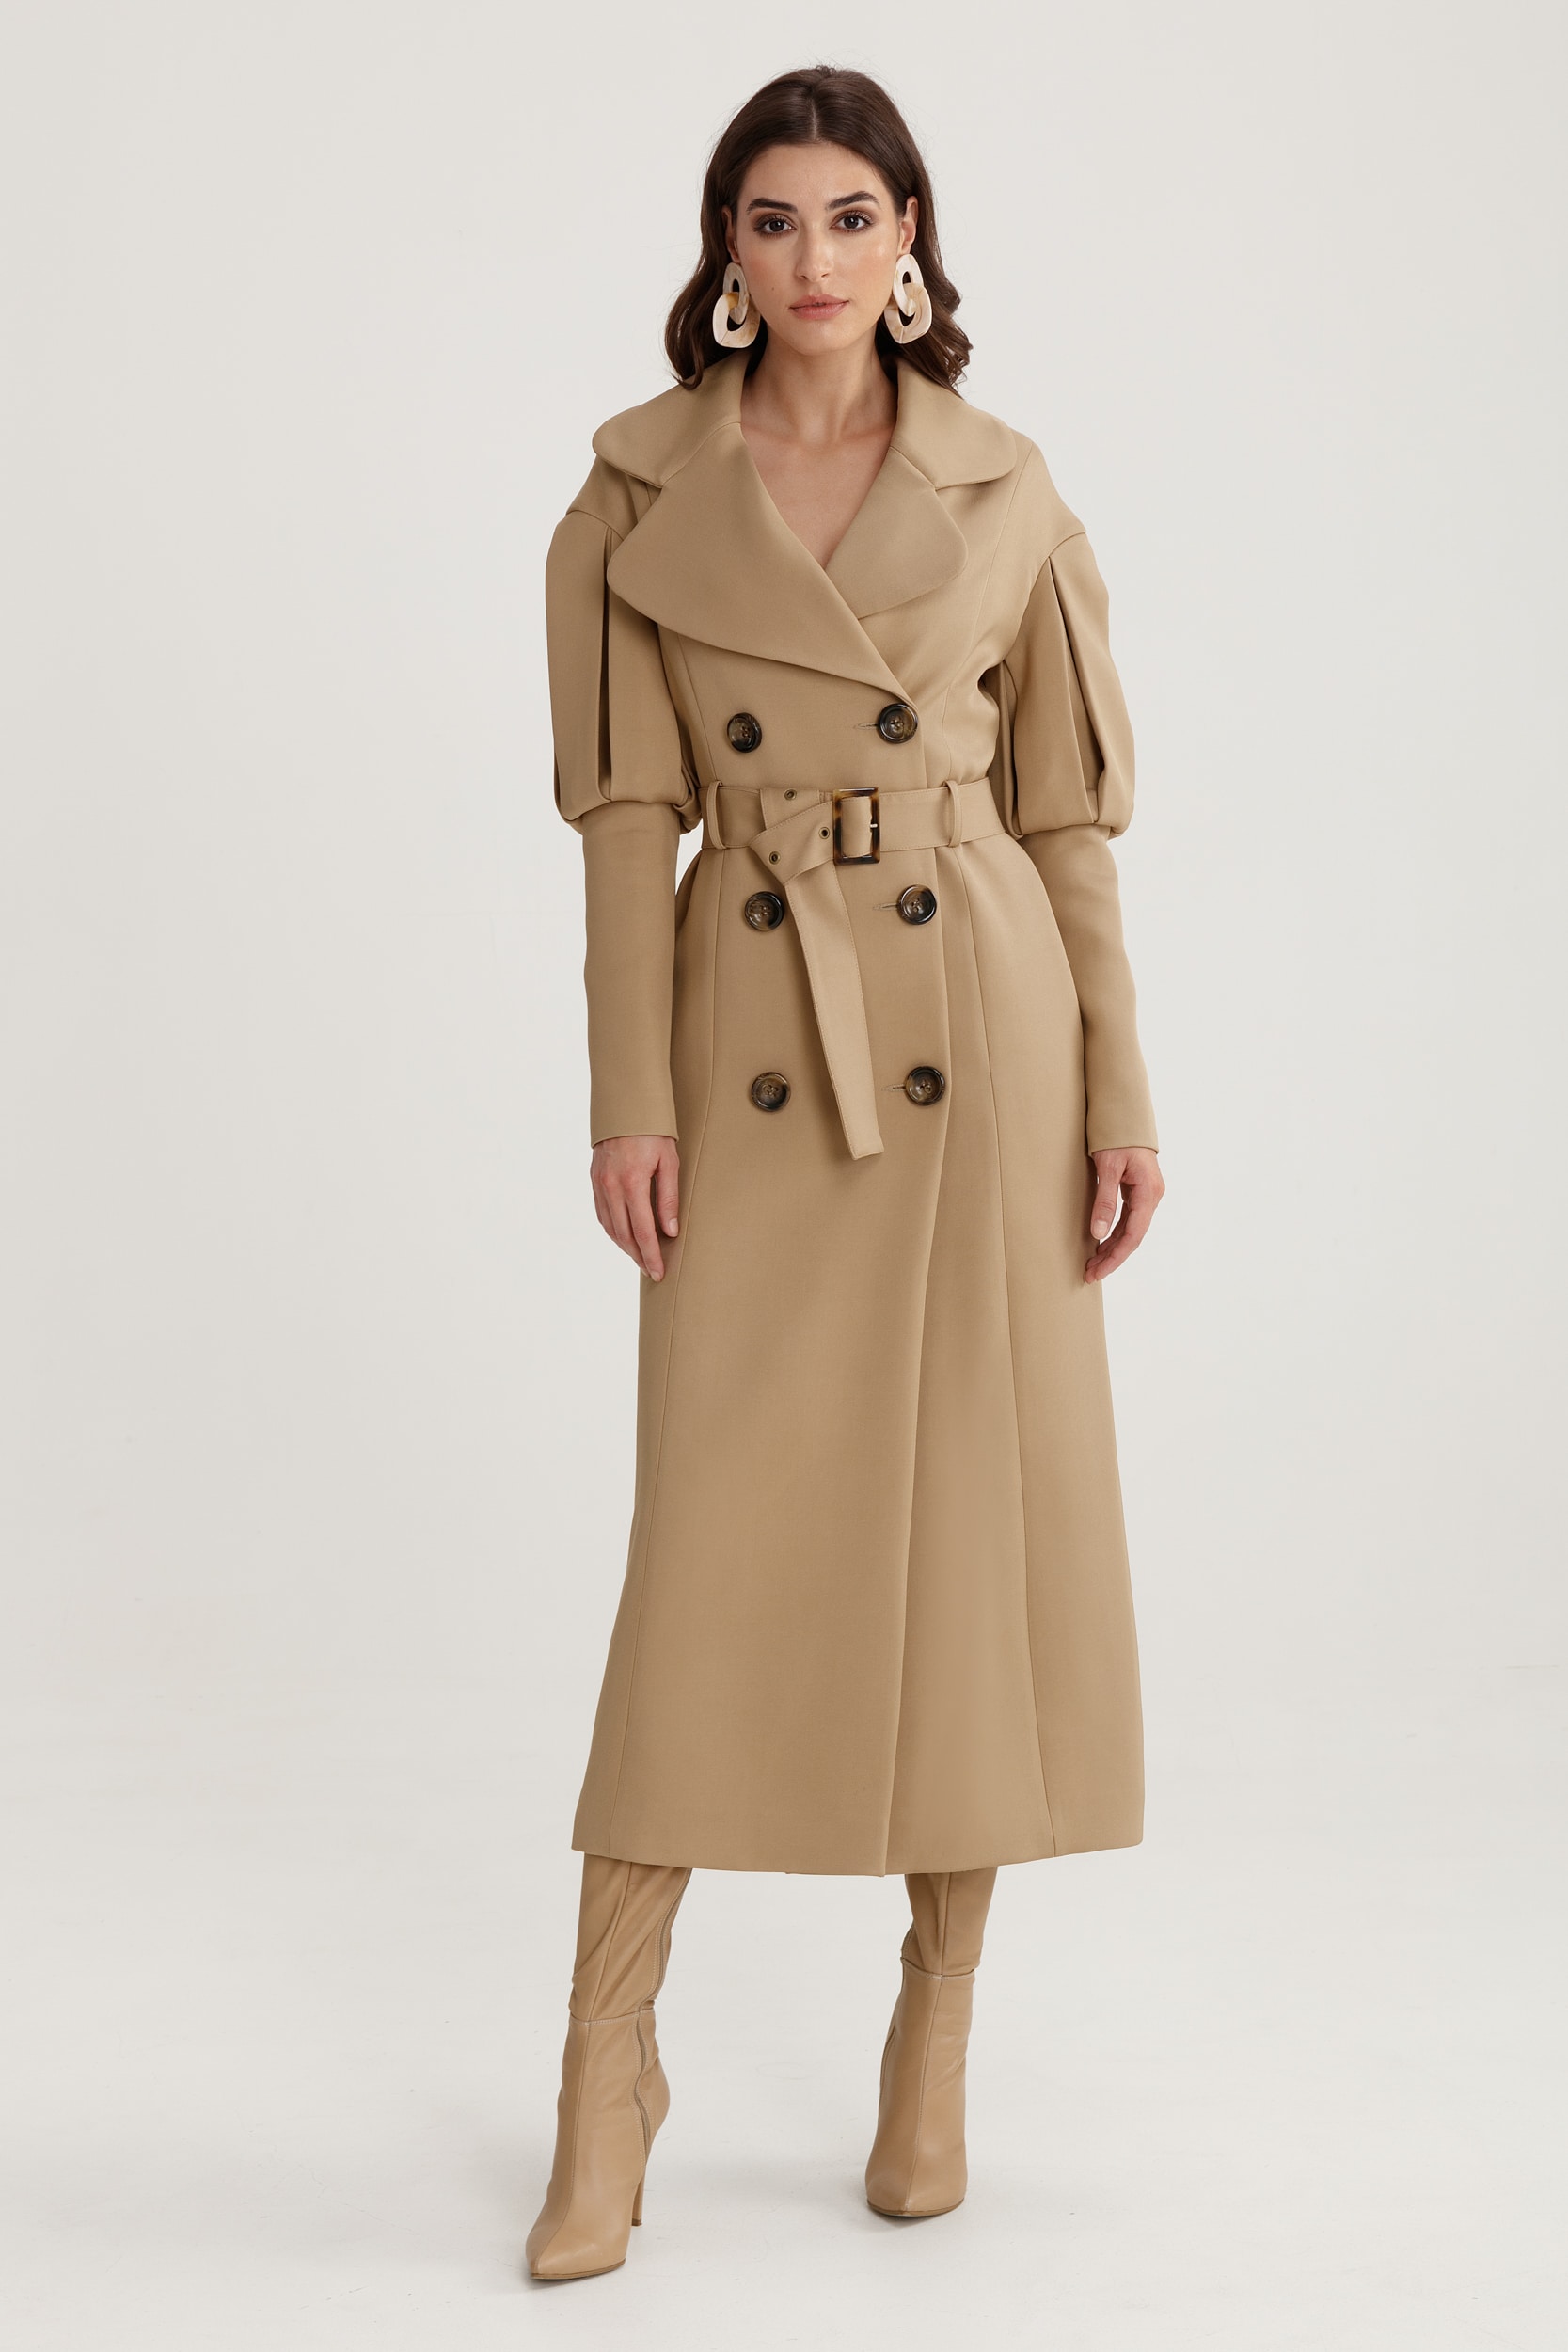 Statement Pleated Shoulders Trench Coat in Beige